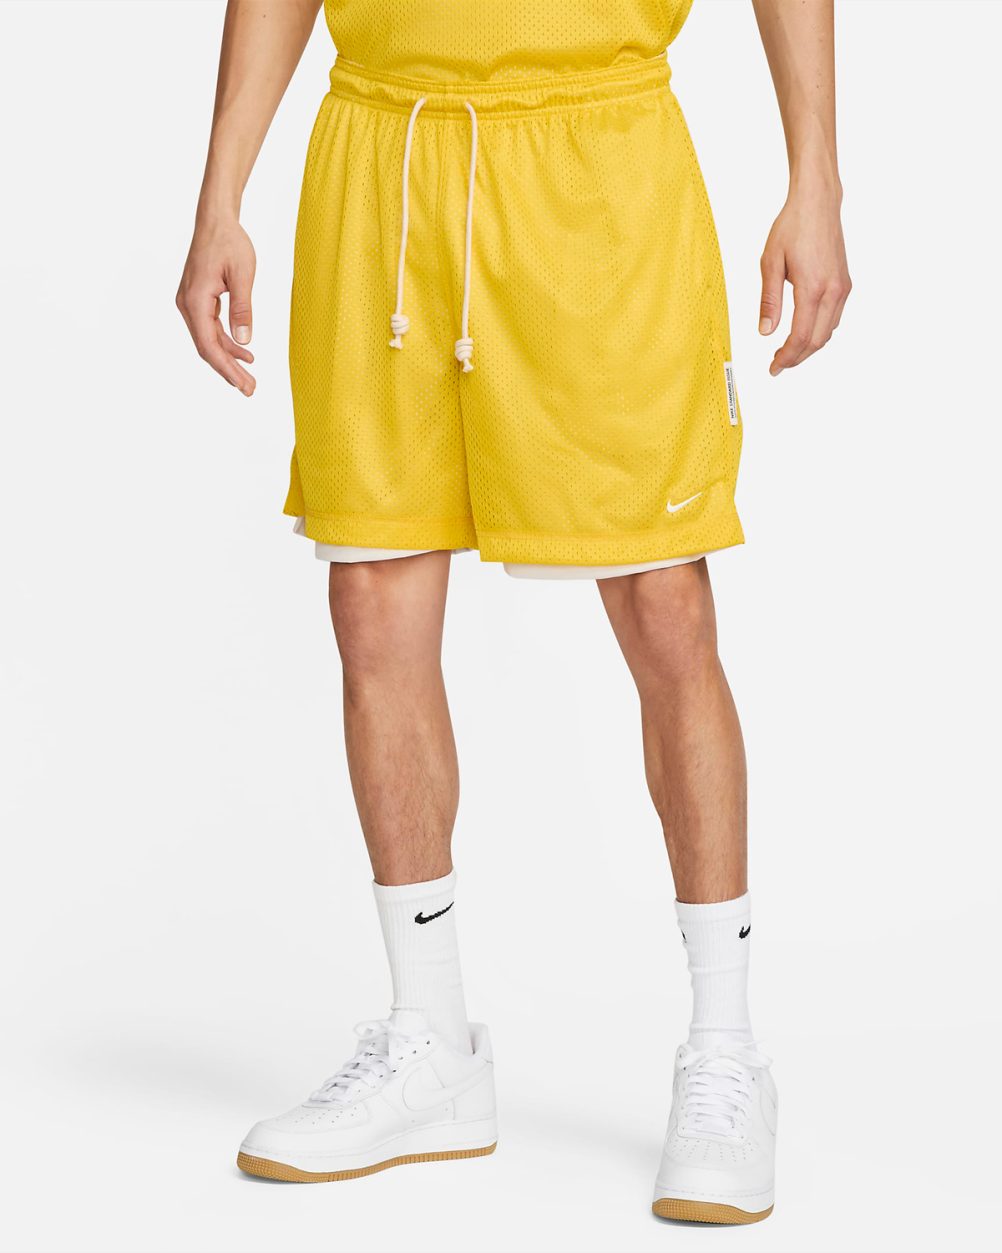 Nike Air Force 1 Low Yellow Jewel Shirts Clothing Outfits